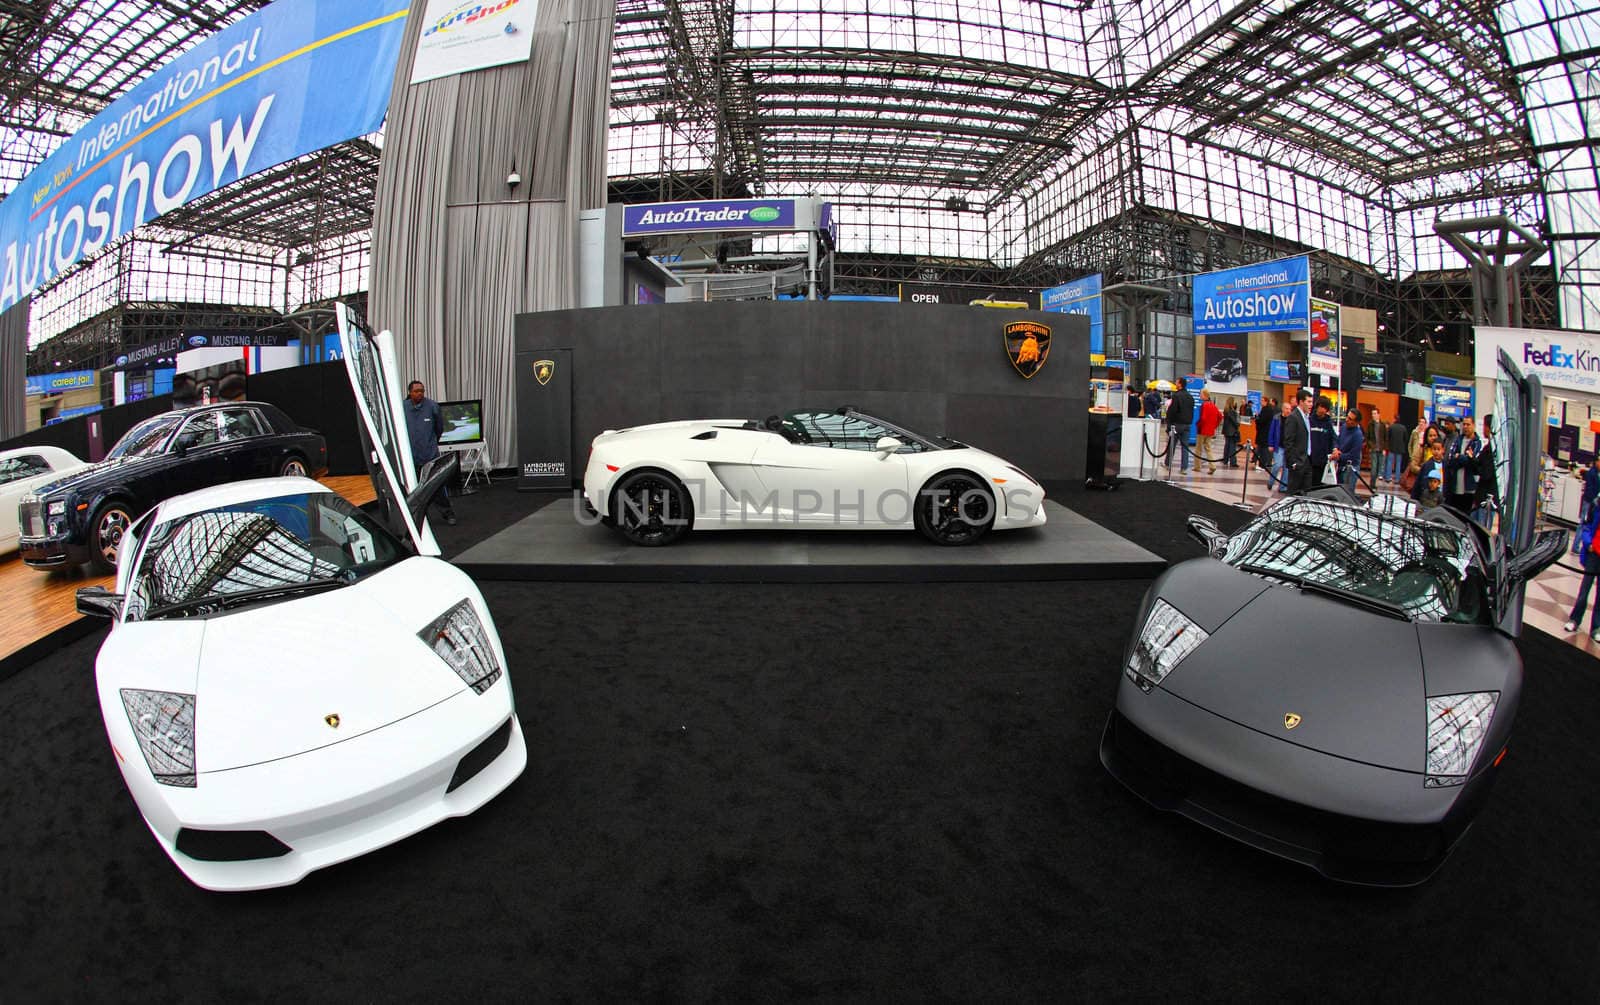 New York City, April 10, 2009: The opening day of NY International Auto Show 2009. The auto industry is struggling in the current economic crisis.